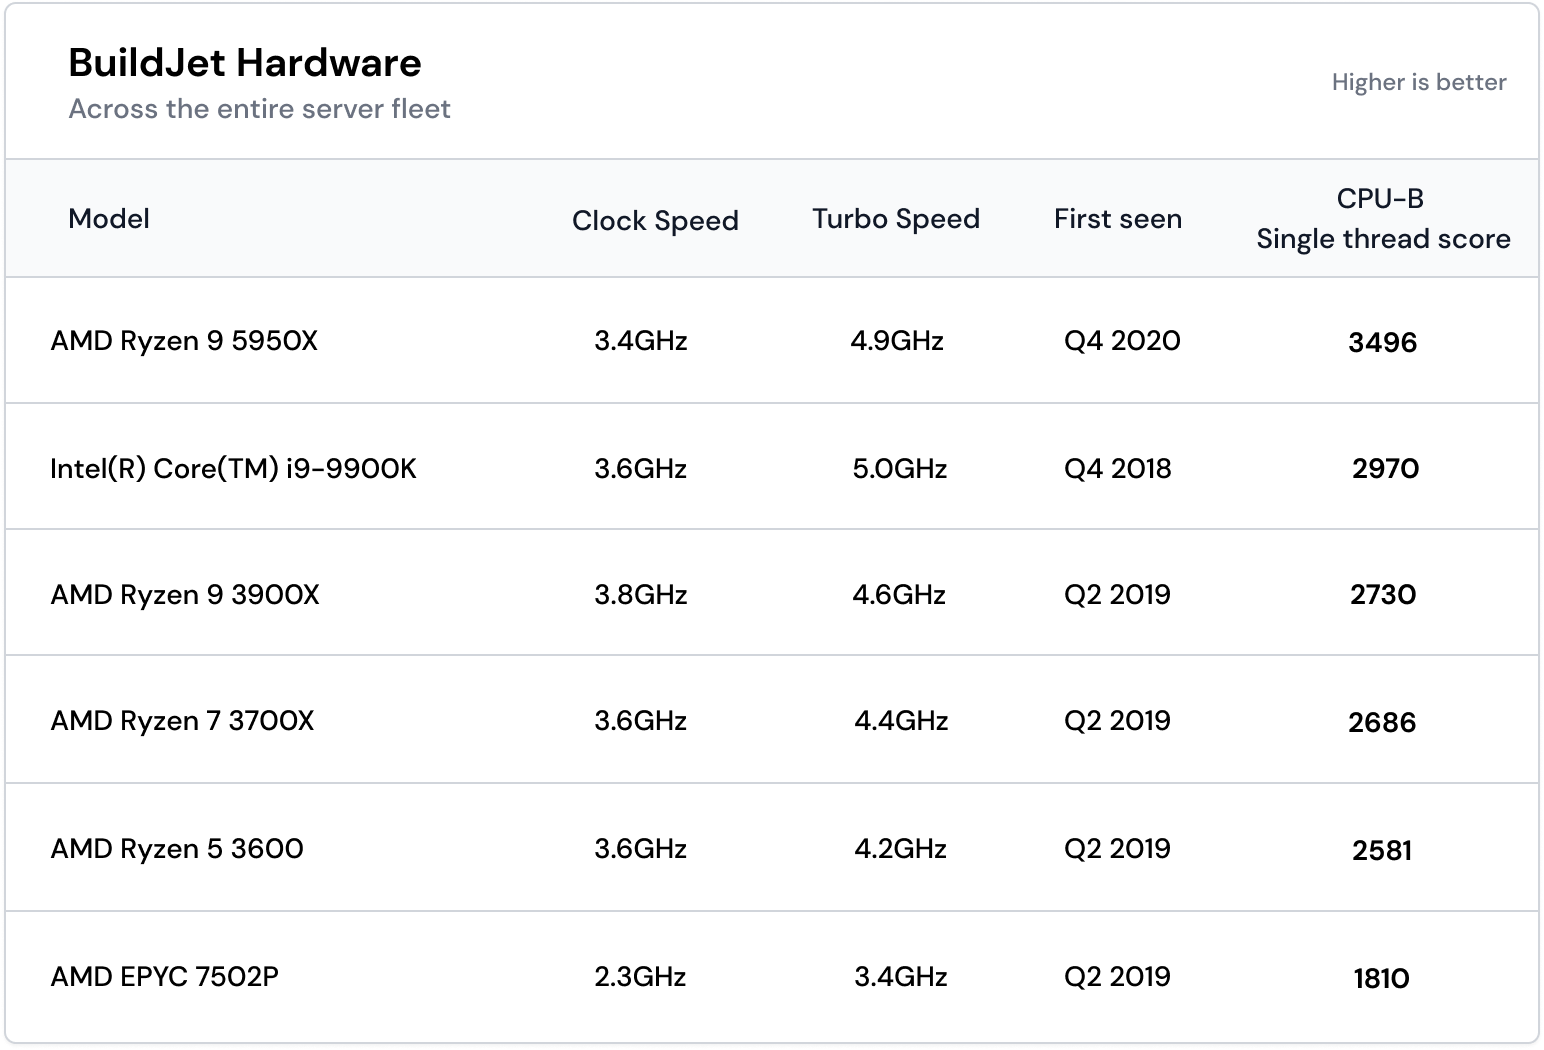 Currently available BuildJet hardware